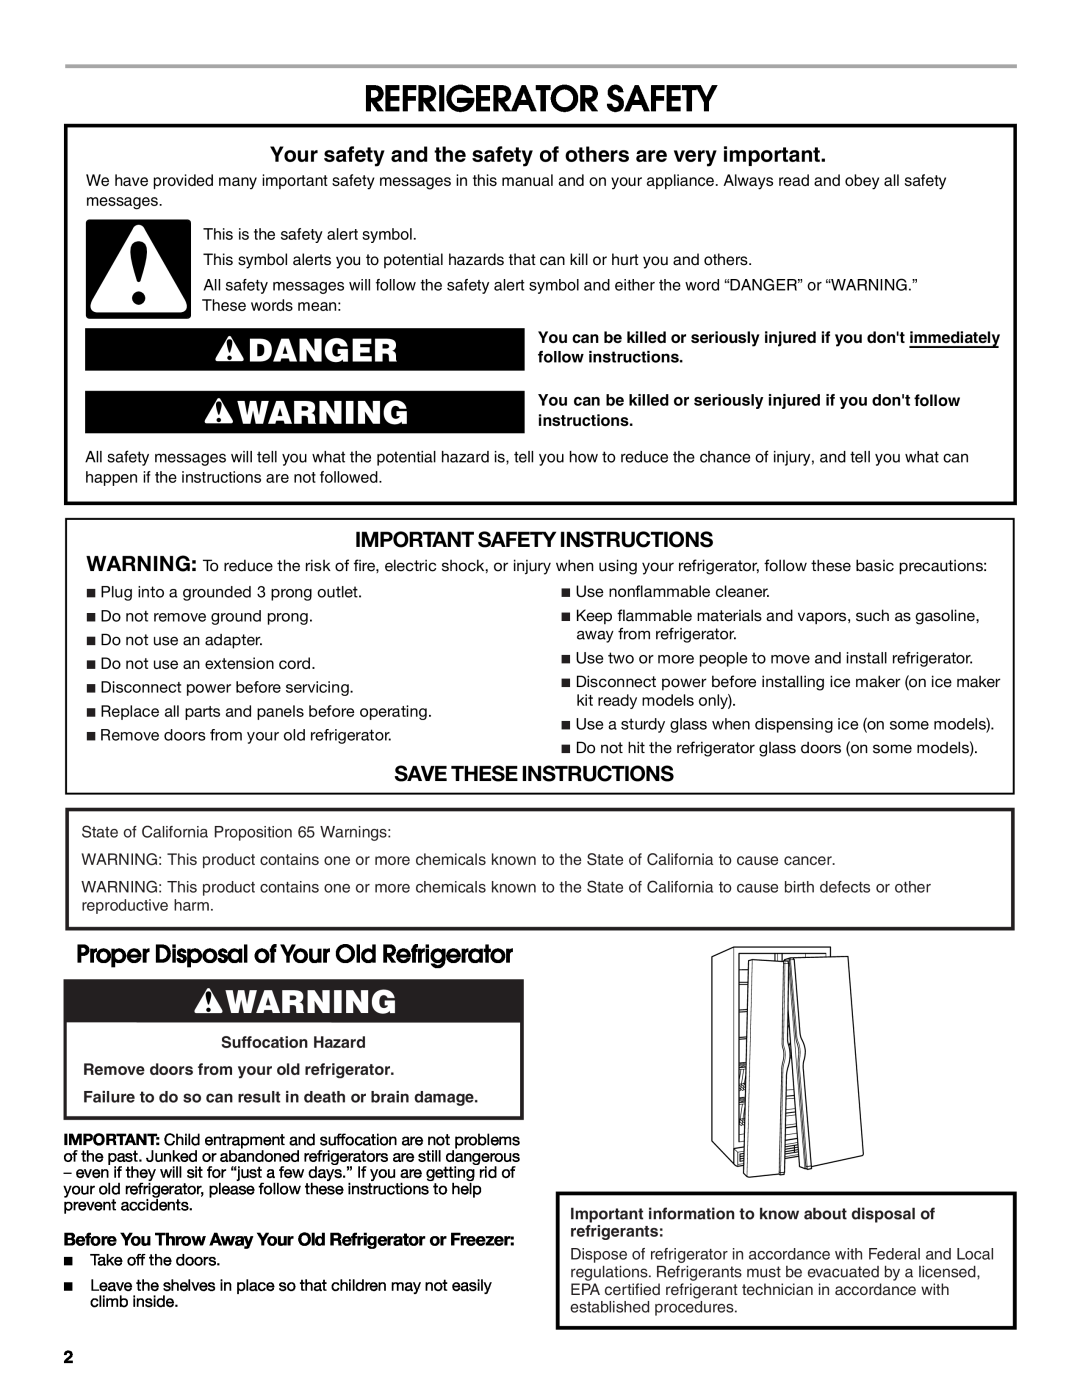 Jenn-Air W10487492A Refrigerator Safety, Danger, Proper Disposal of Your Old Refrigerator, Important Safety Instructions 